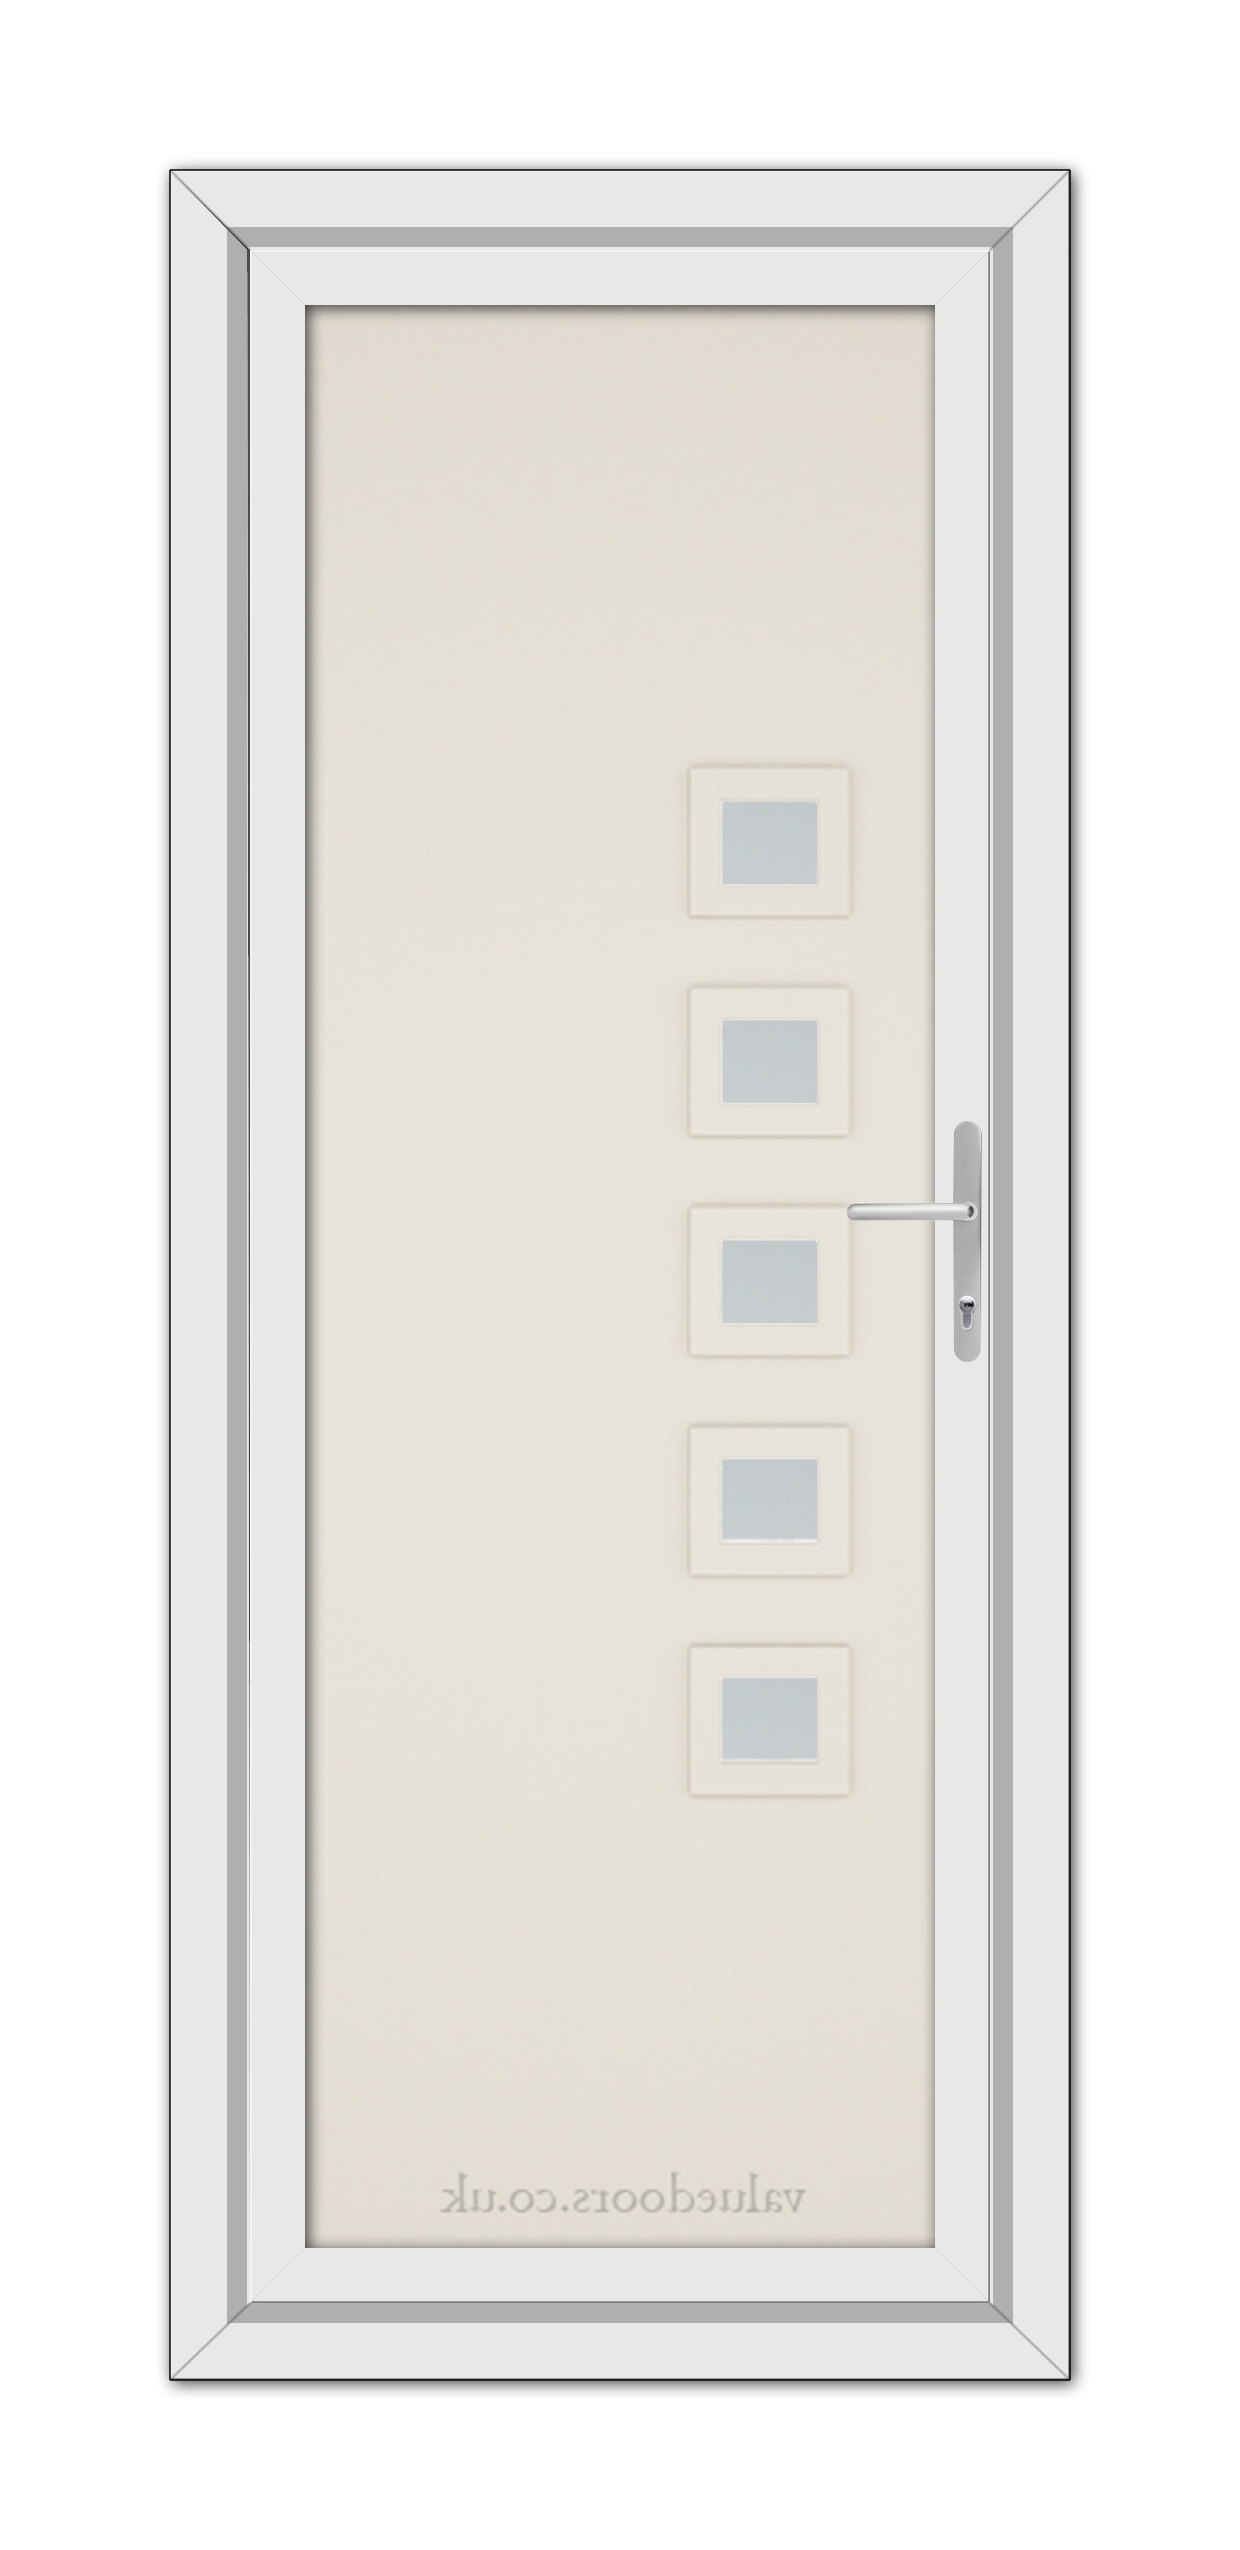 Sentence with product name: Vertical image of a closed Cream Malaga uPVC door with a modern handle and five small square windows aligned vertically on the left side, within a silver frame.